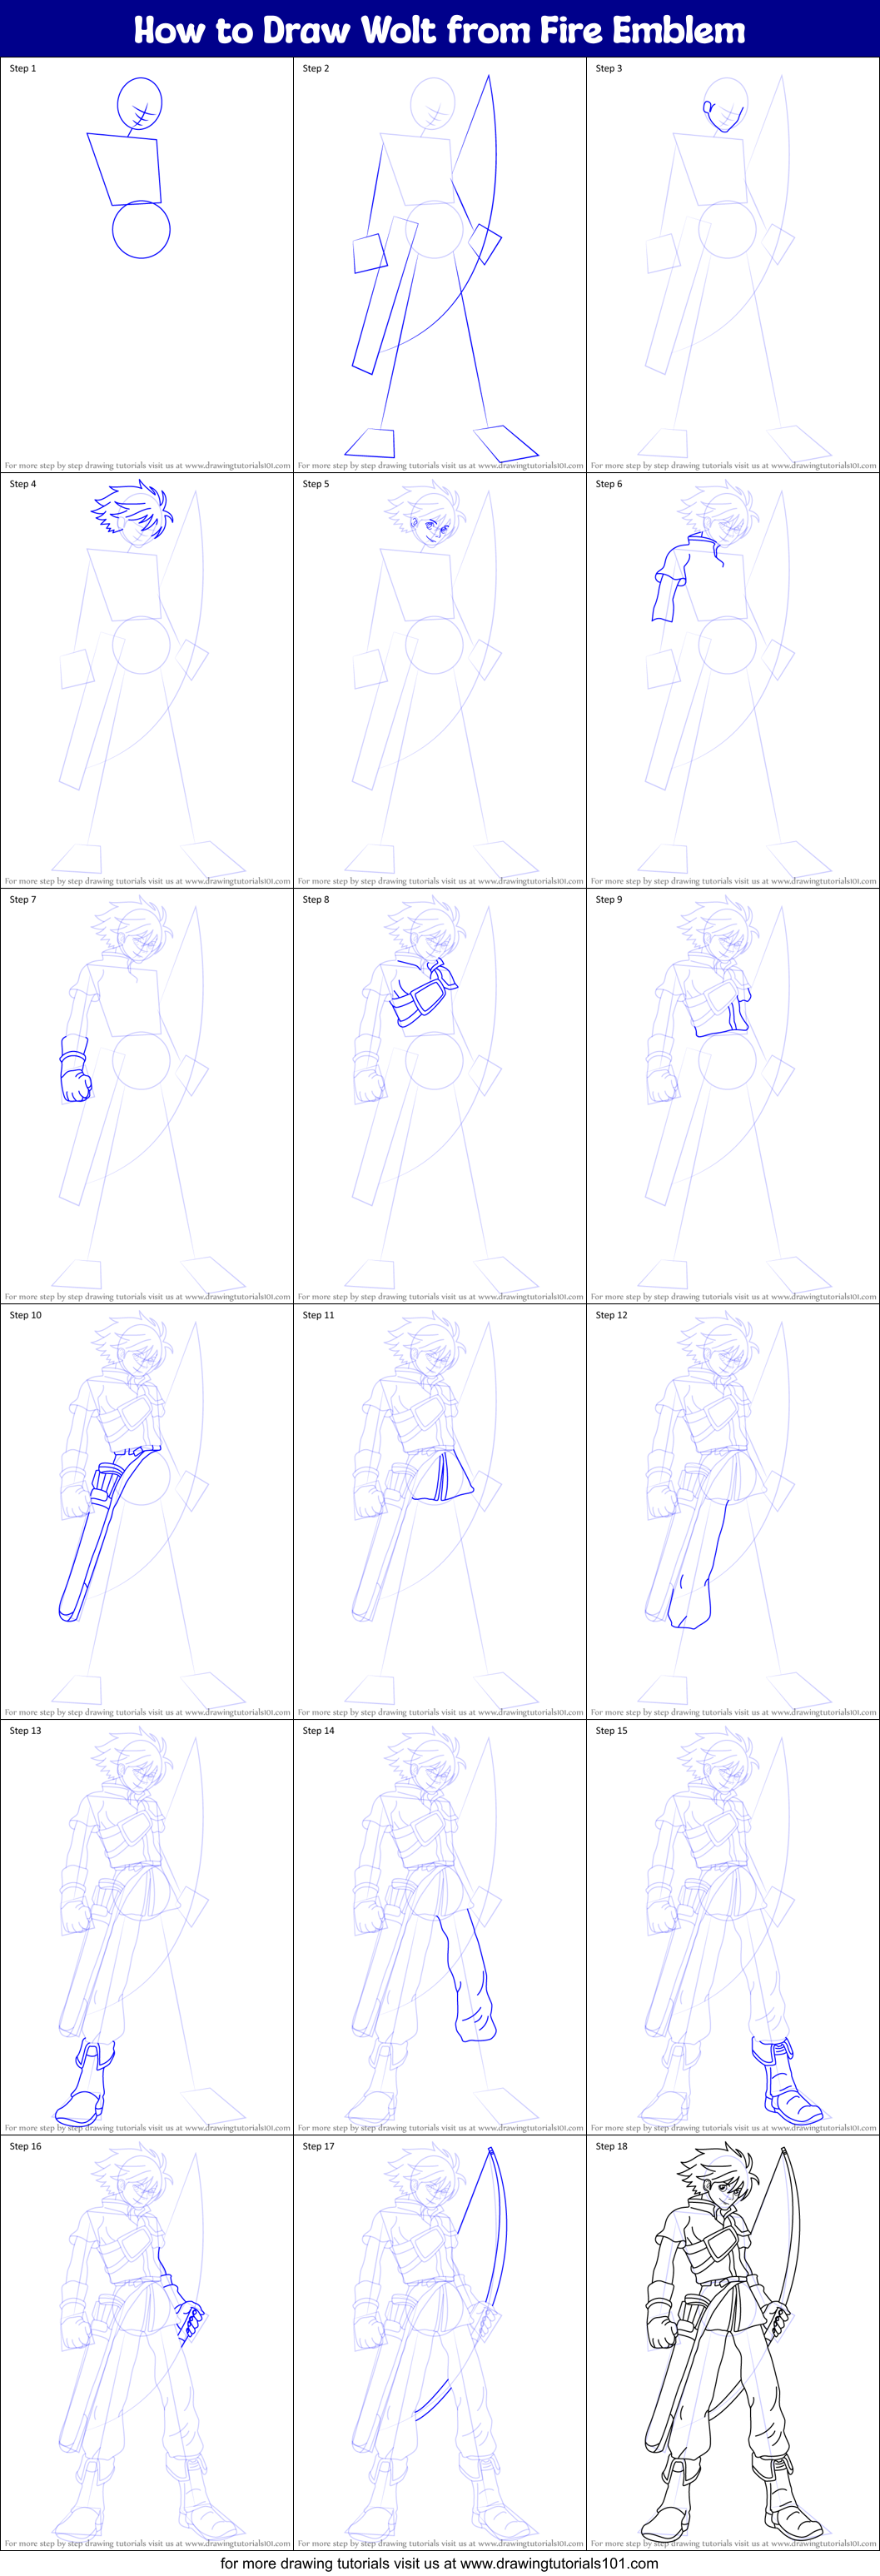 How to Draw Wolt from Fire Emblem printable step by step drawing sheet ...